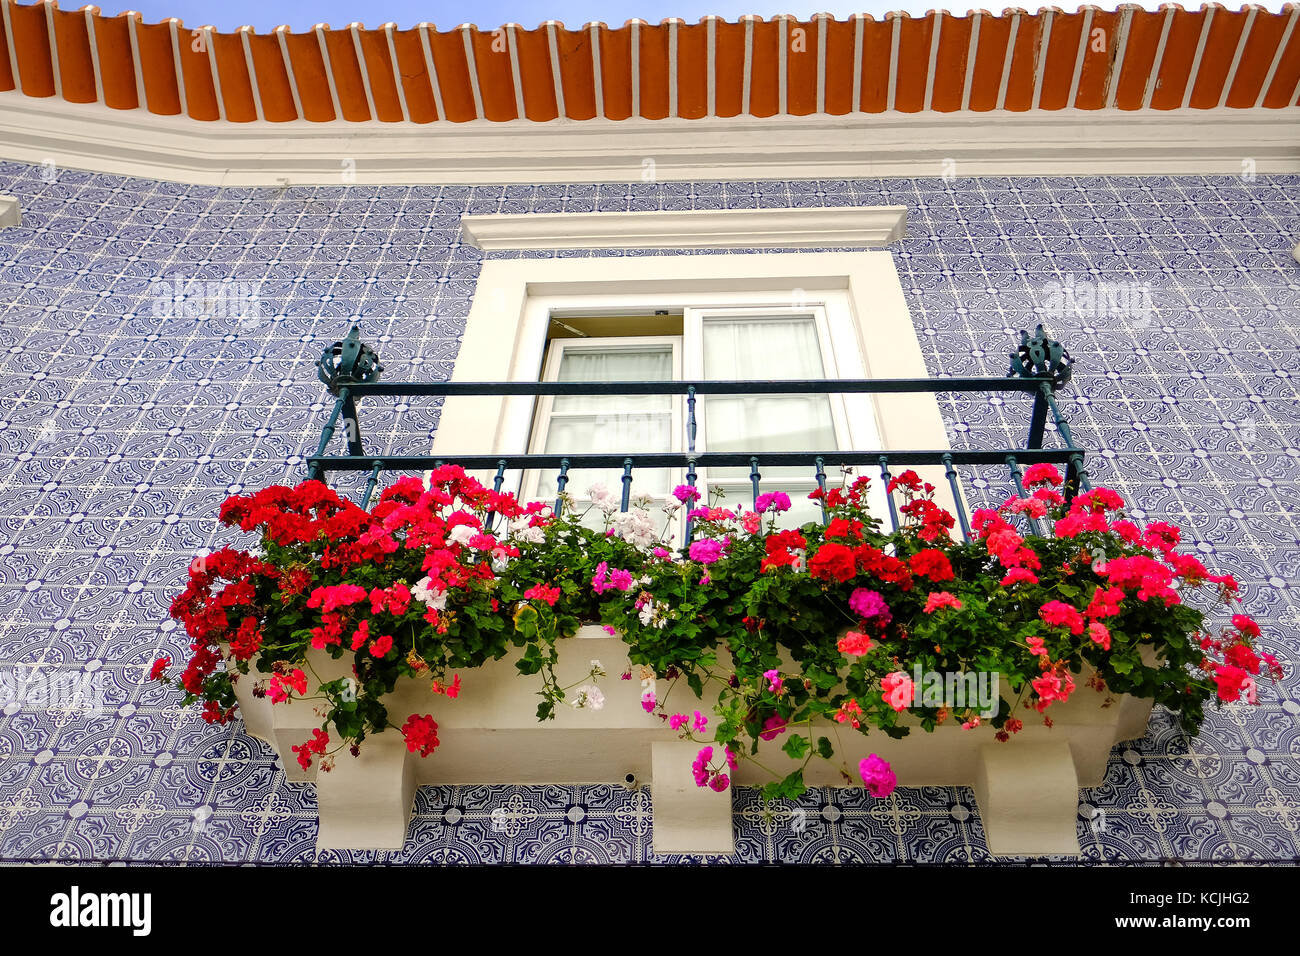 window with balcony ornate with flowers in a traditional Portuguese style residence in Aveiro. The wall is covered with ceramic tiles Stock Photo